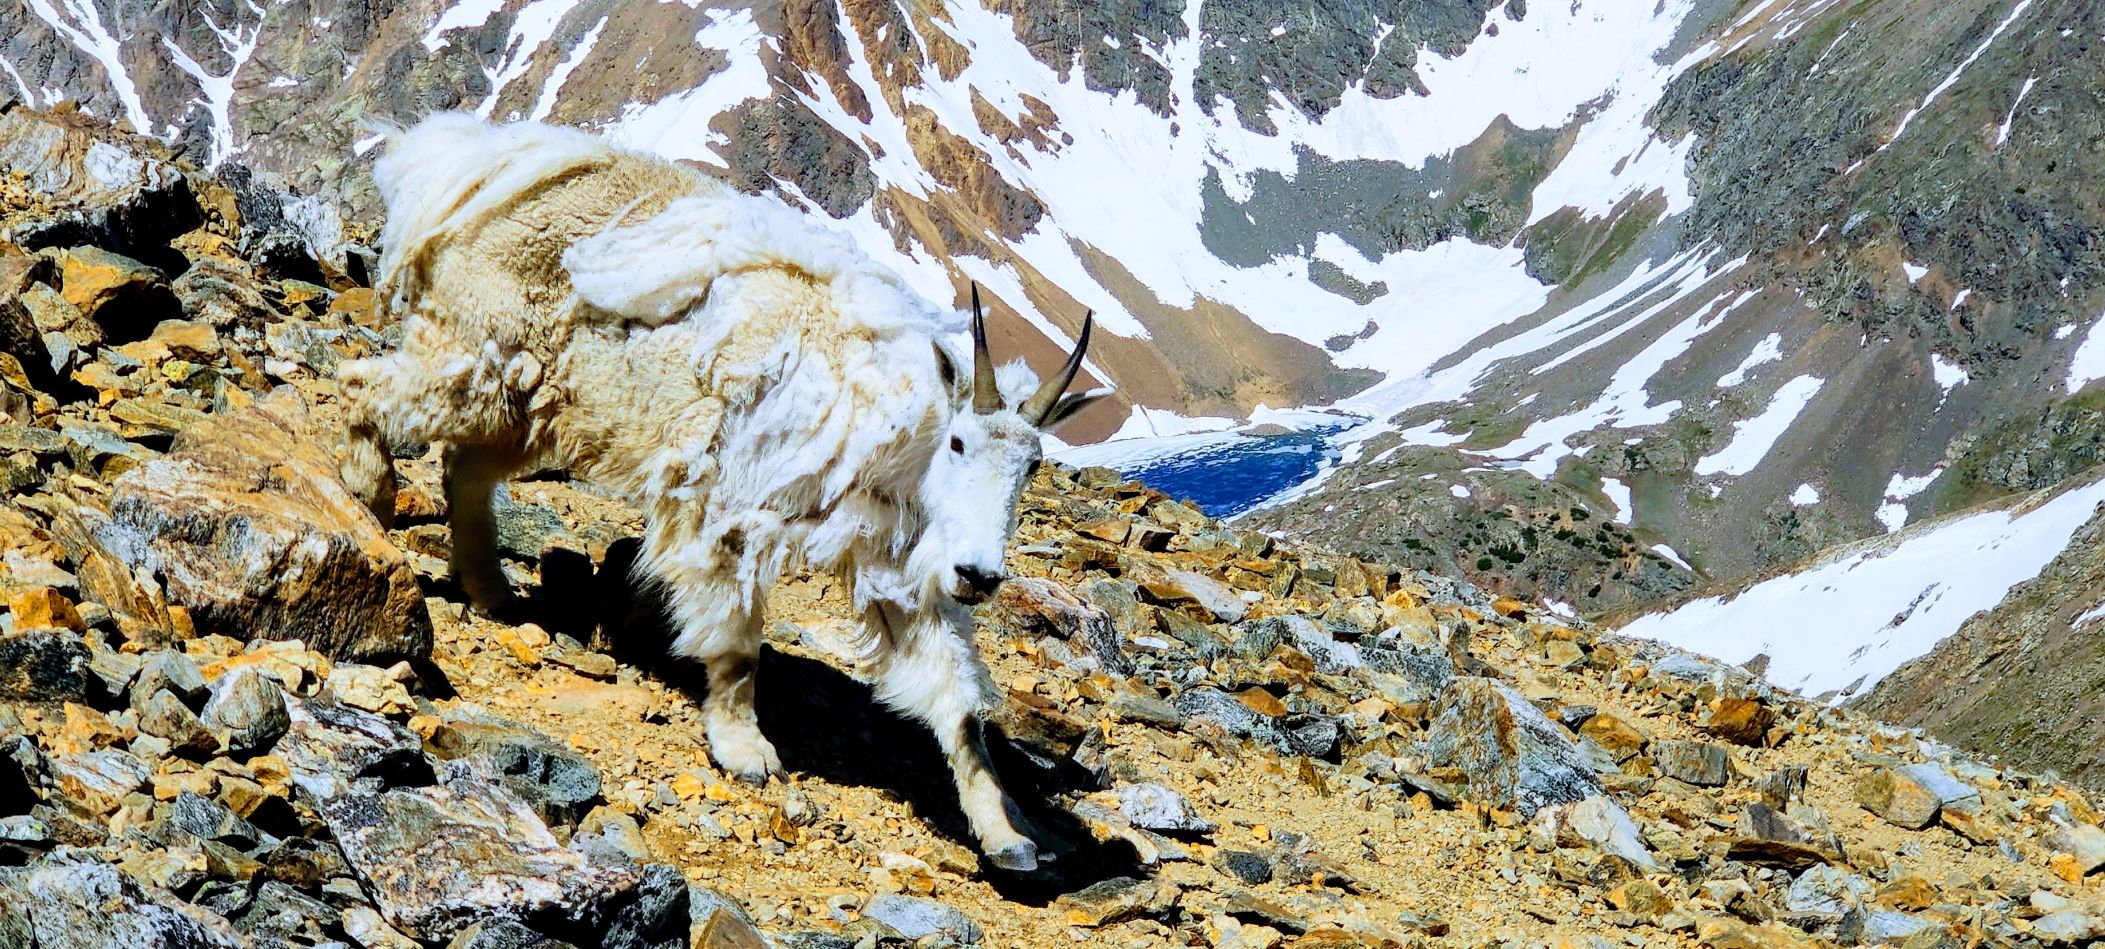 A close up image of a mountain goat posing on a trail in Colorado as a snow-capped mountain valley with a lake appears behind him in the distance